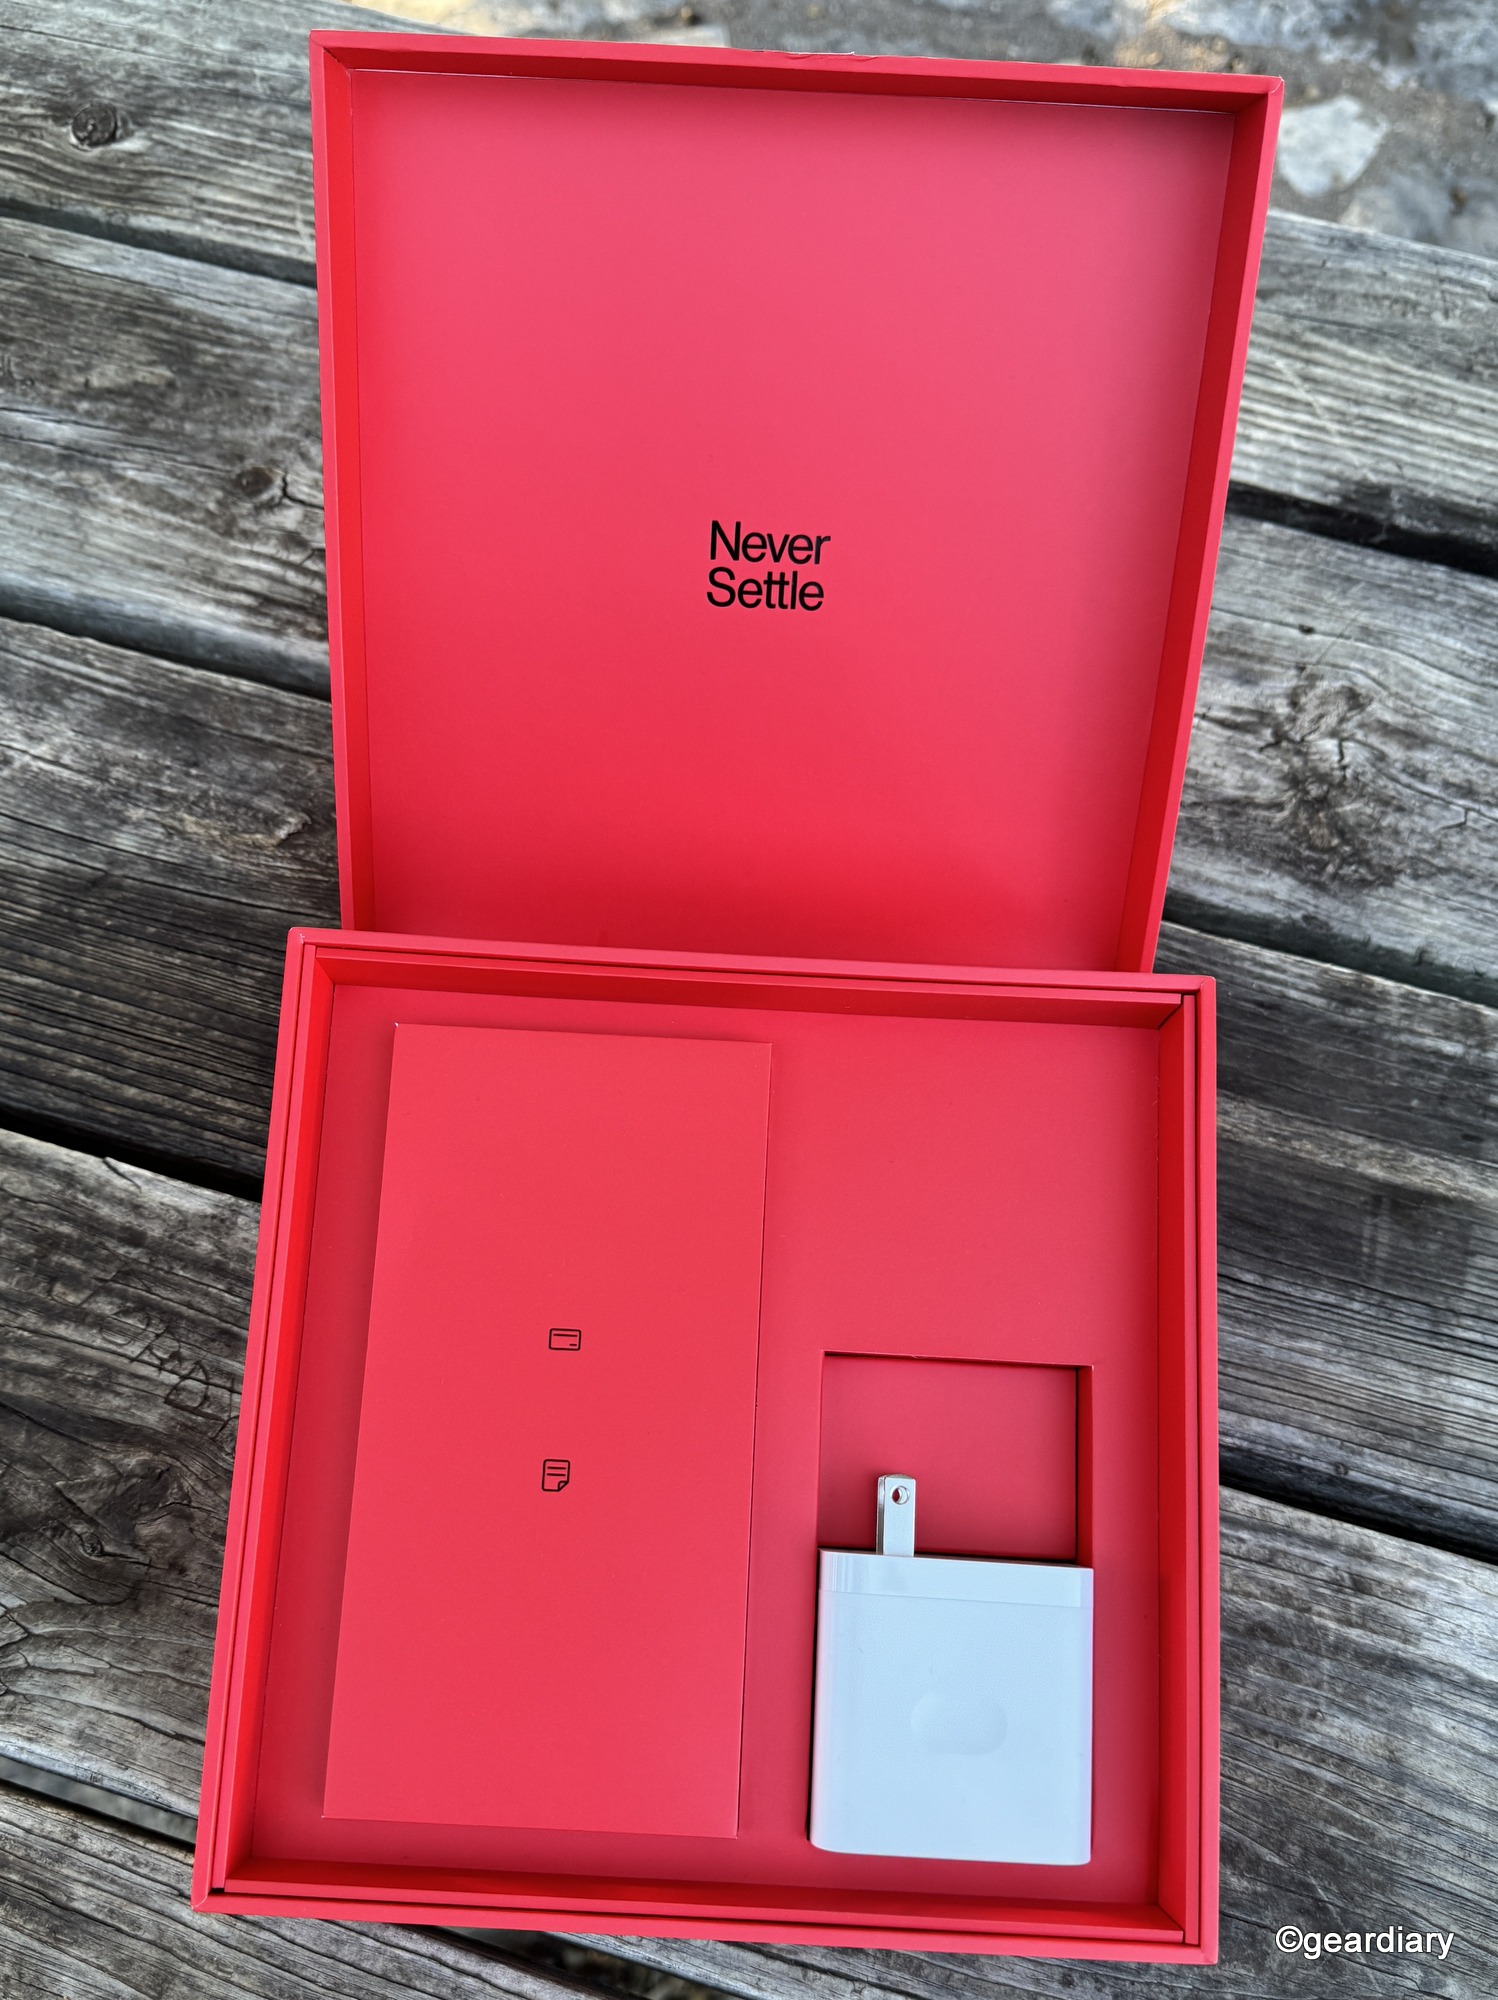 The included OnePlus Open 80W charger